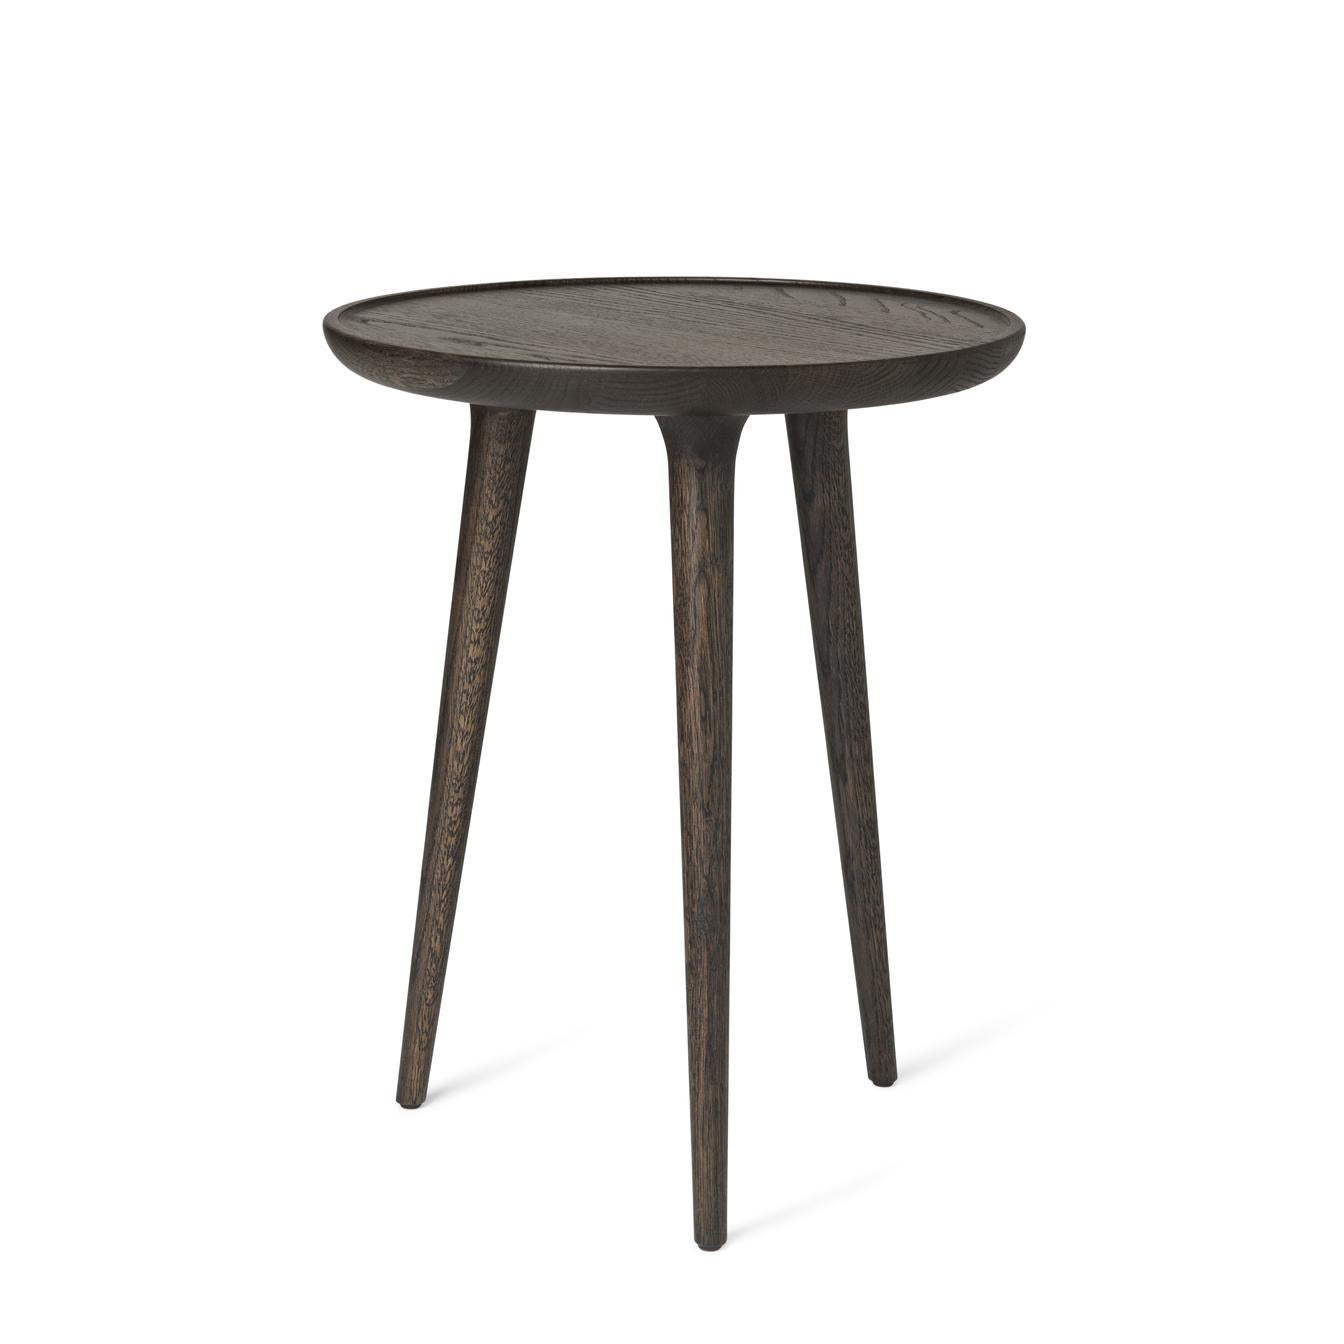 Modern Accent Round Table L FSC Certified Oak Sirka Grey Stain by Mater Design